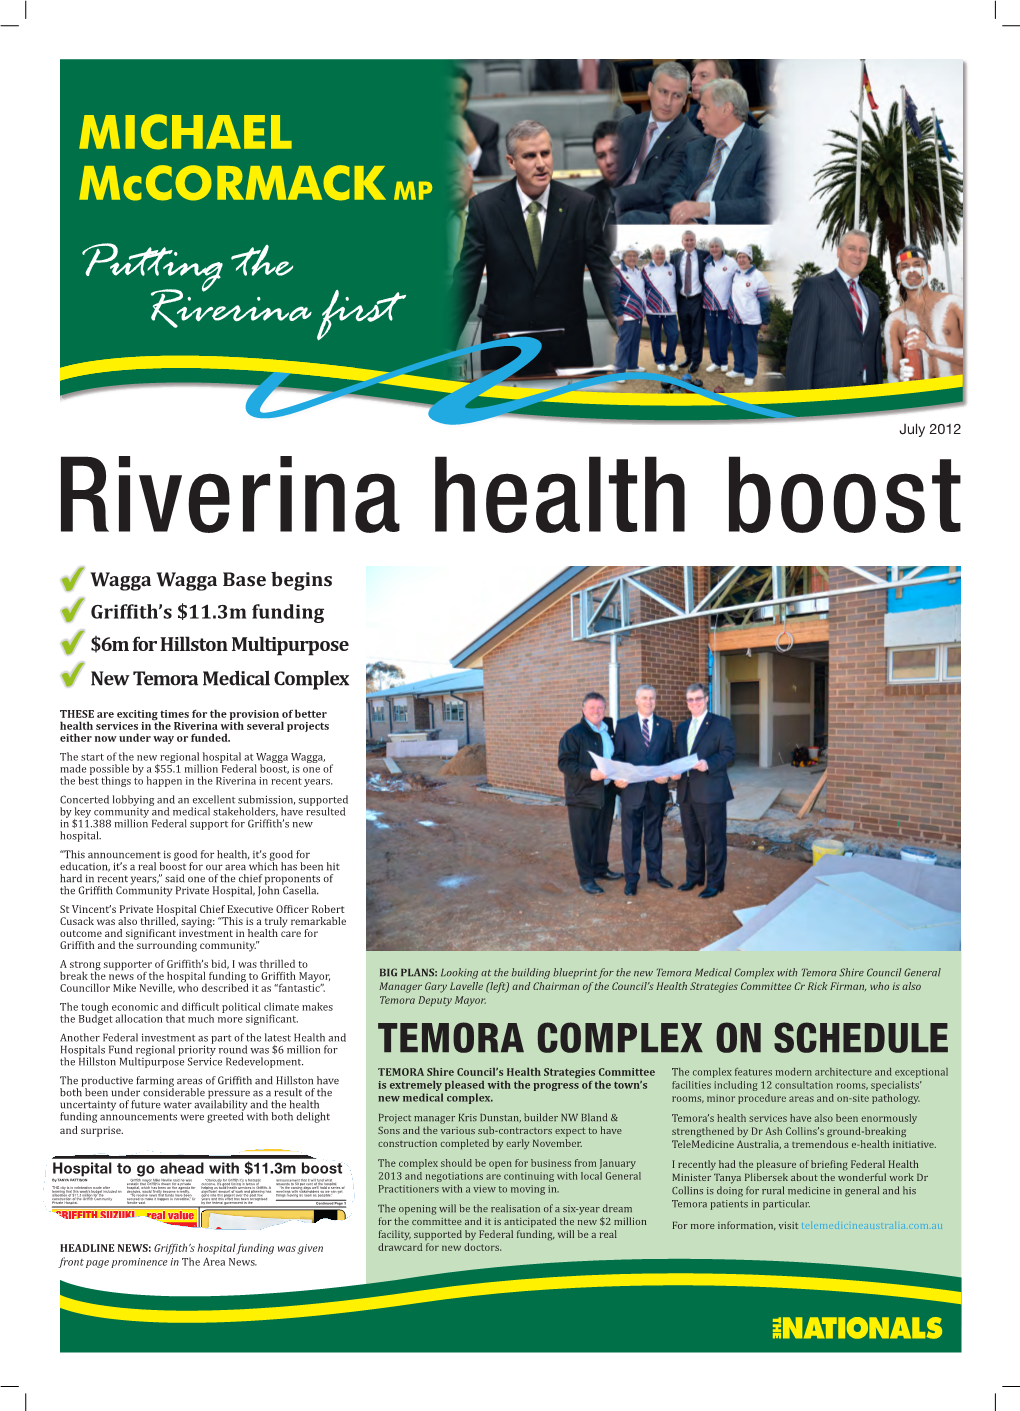 Putting the Riverina First